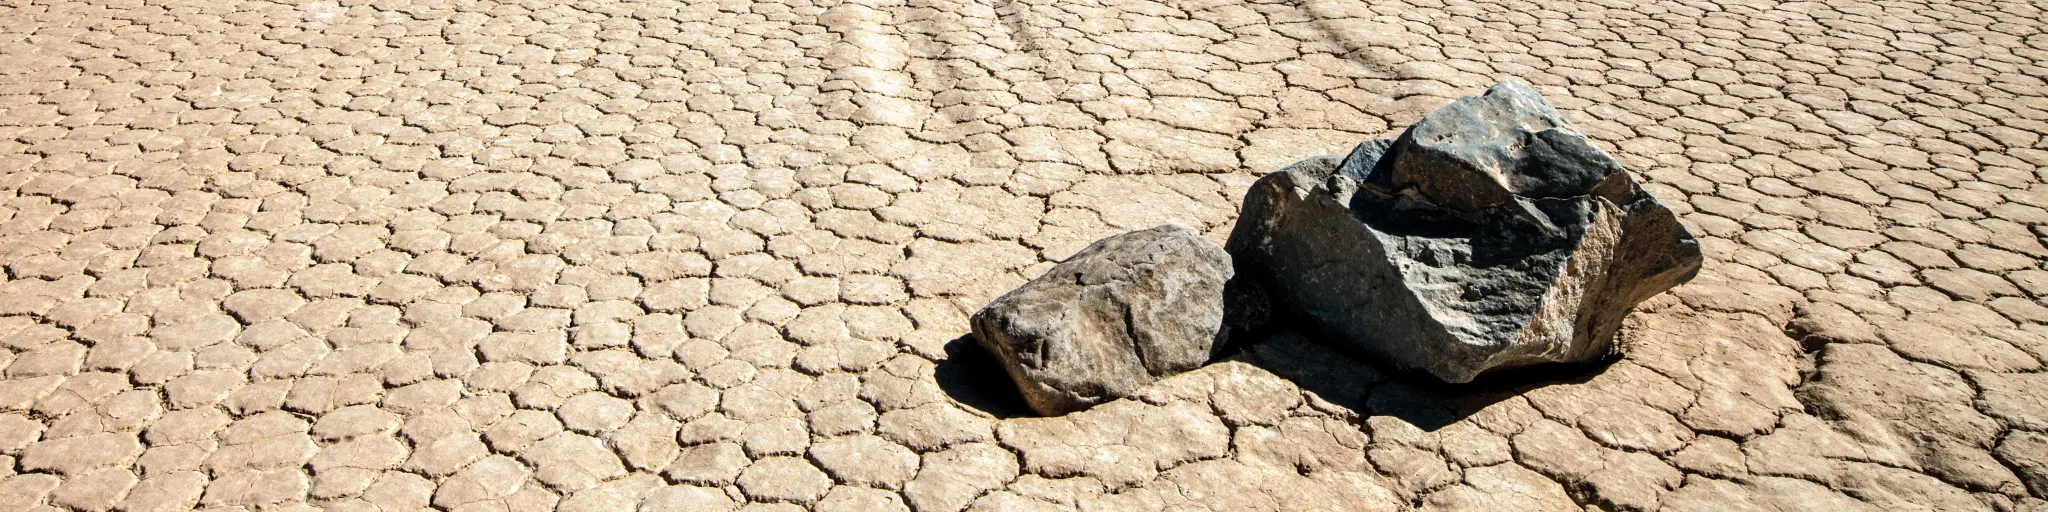 The "twins" at Racetrack Playa, where rocks seem to move on their own on desert ground